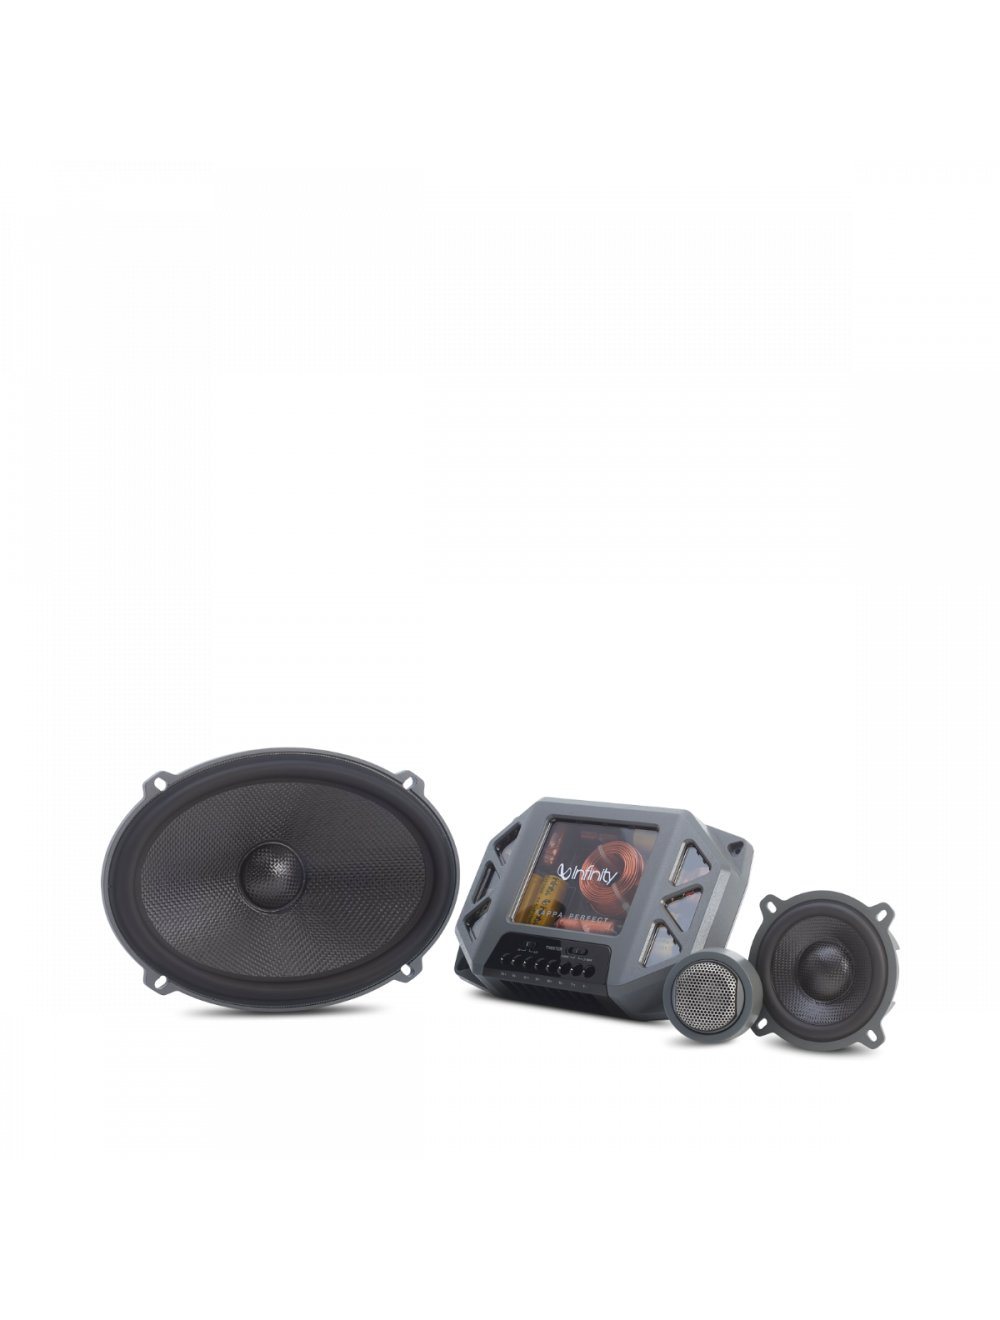 Infinity Perfect 900 6 x 9 (152mm x 230mm) Extreme-Performance 2-Way Component Speaker System